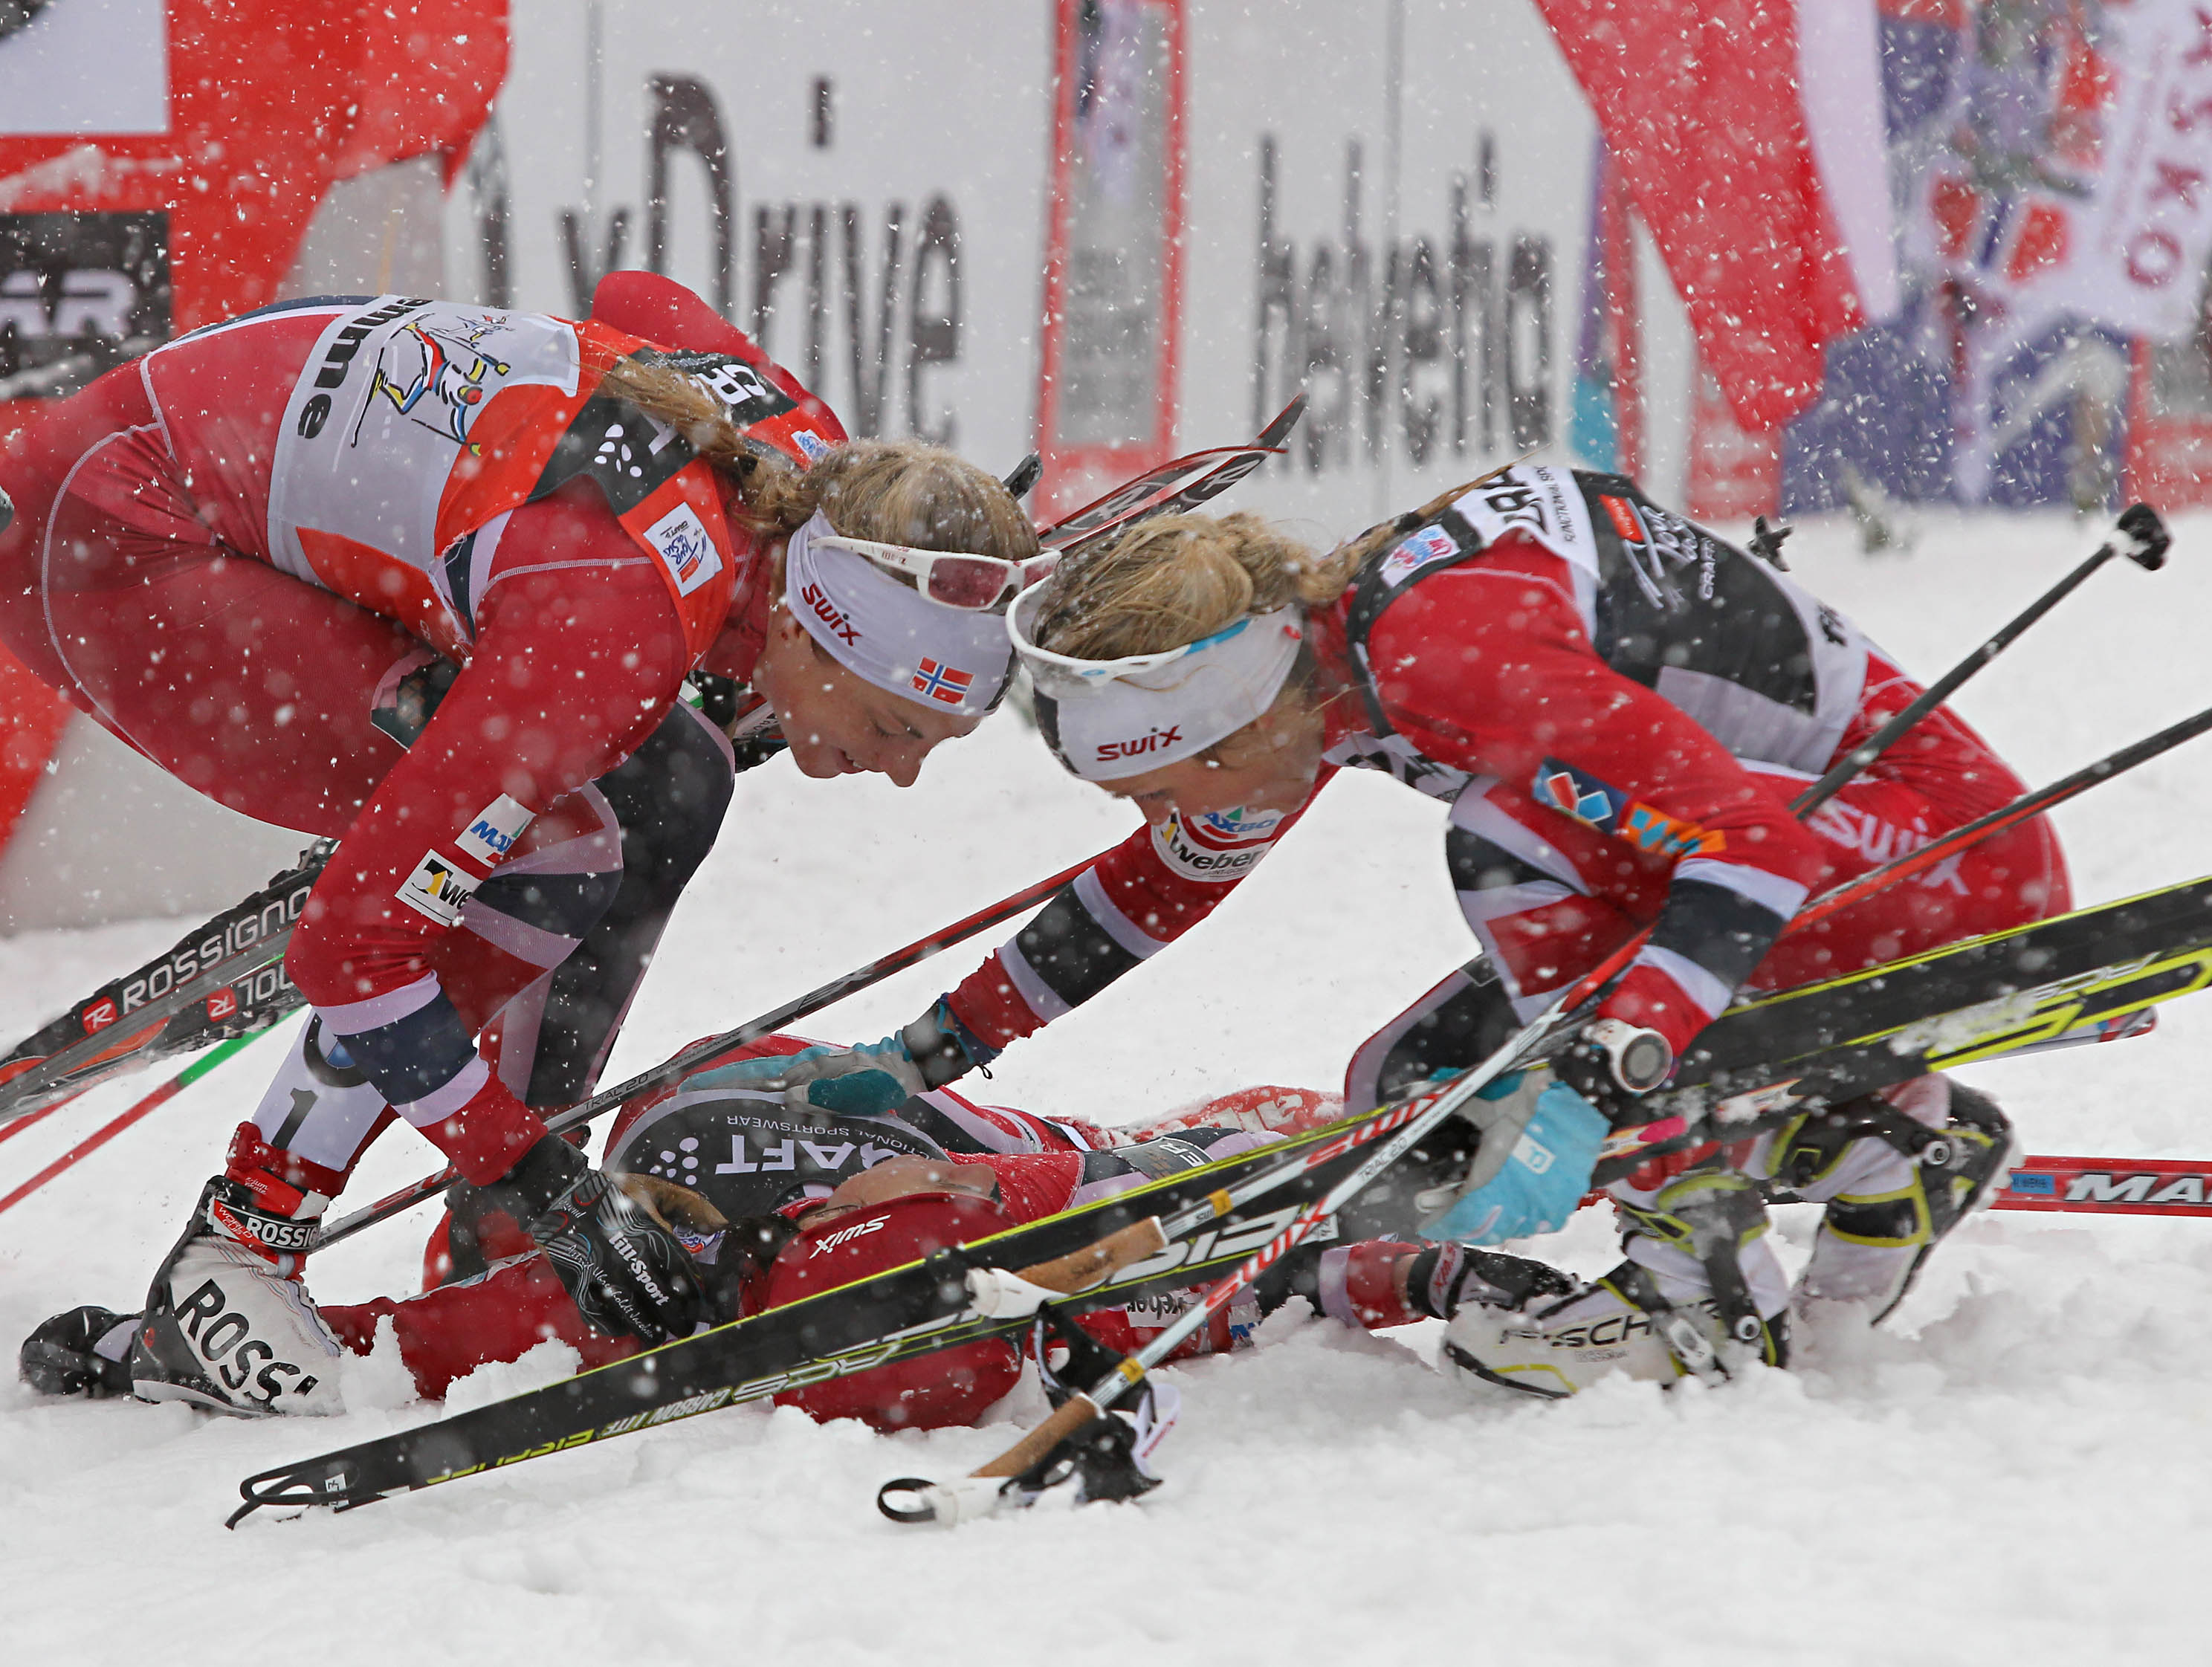 Jacobsen and Johaug greet Weng at the finish. Photo: Fiemme Ski World Cup